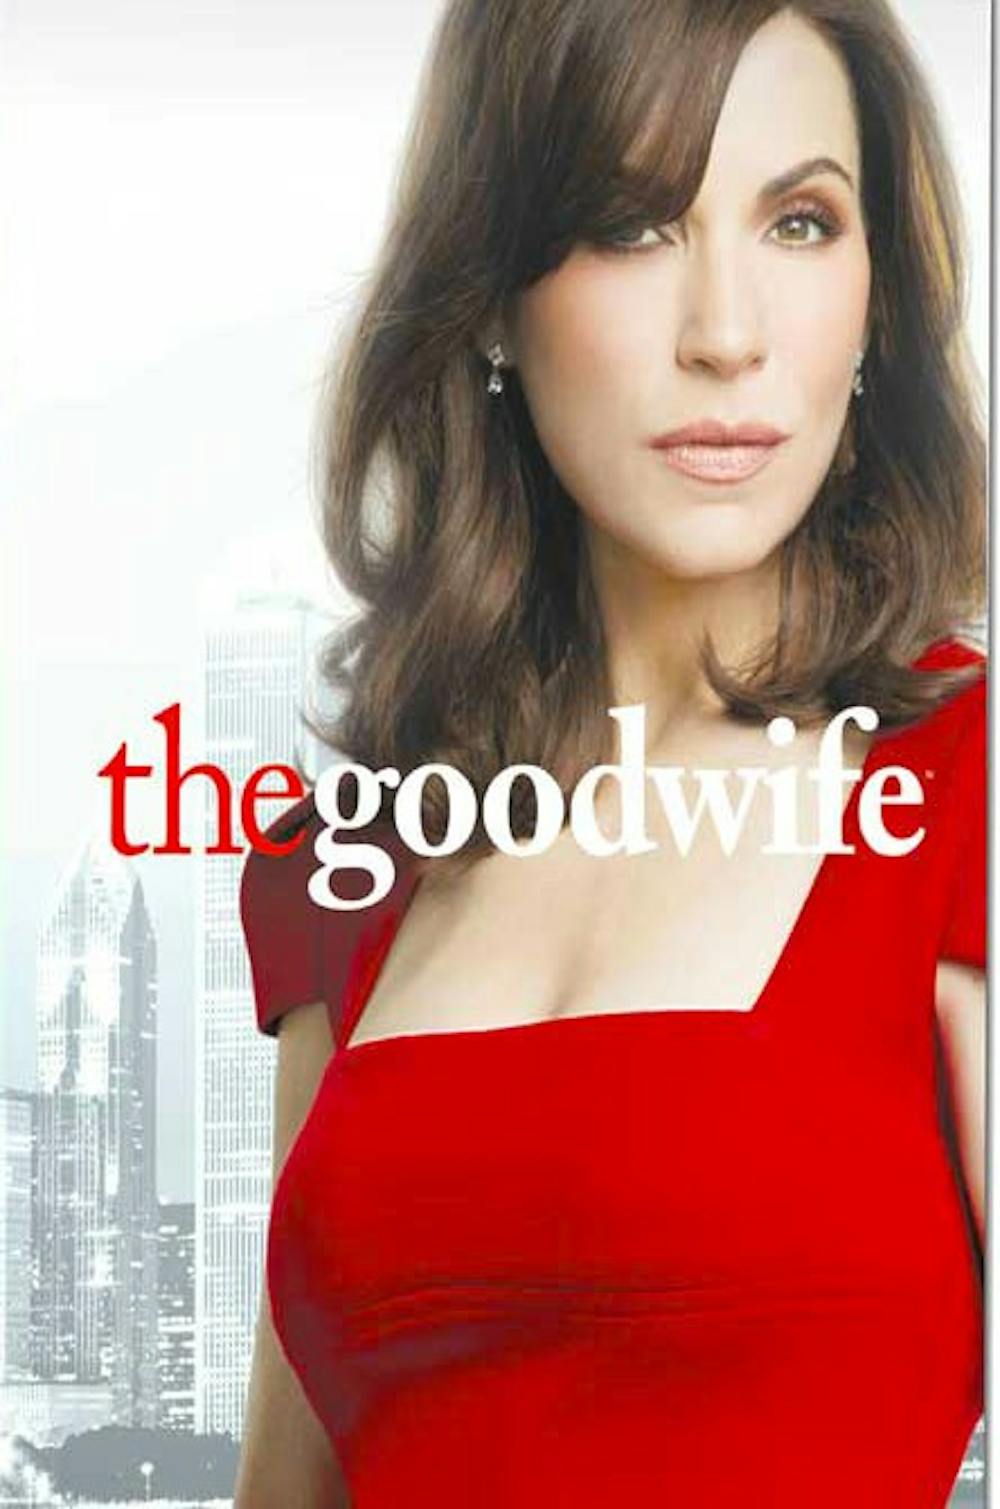 “The Good Wife” boldly goes where no other show is willing to go.